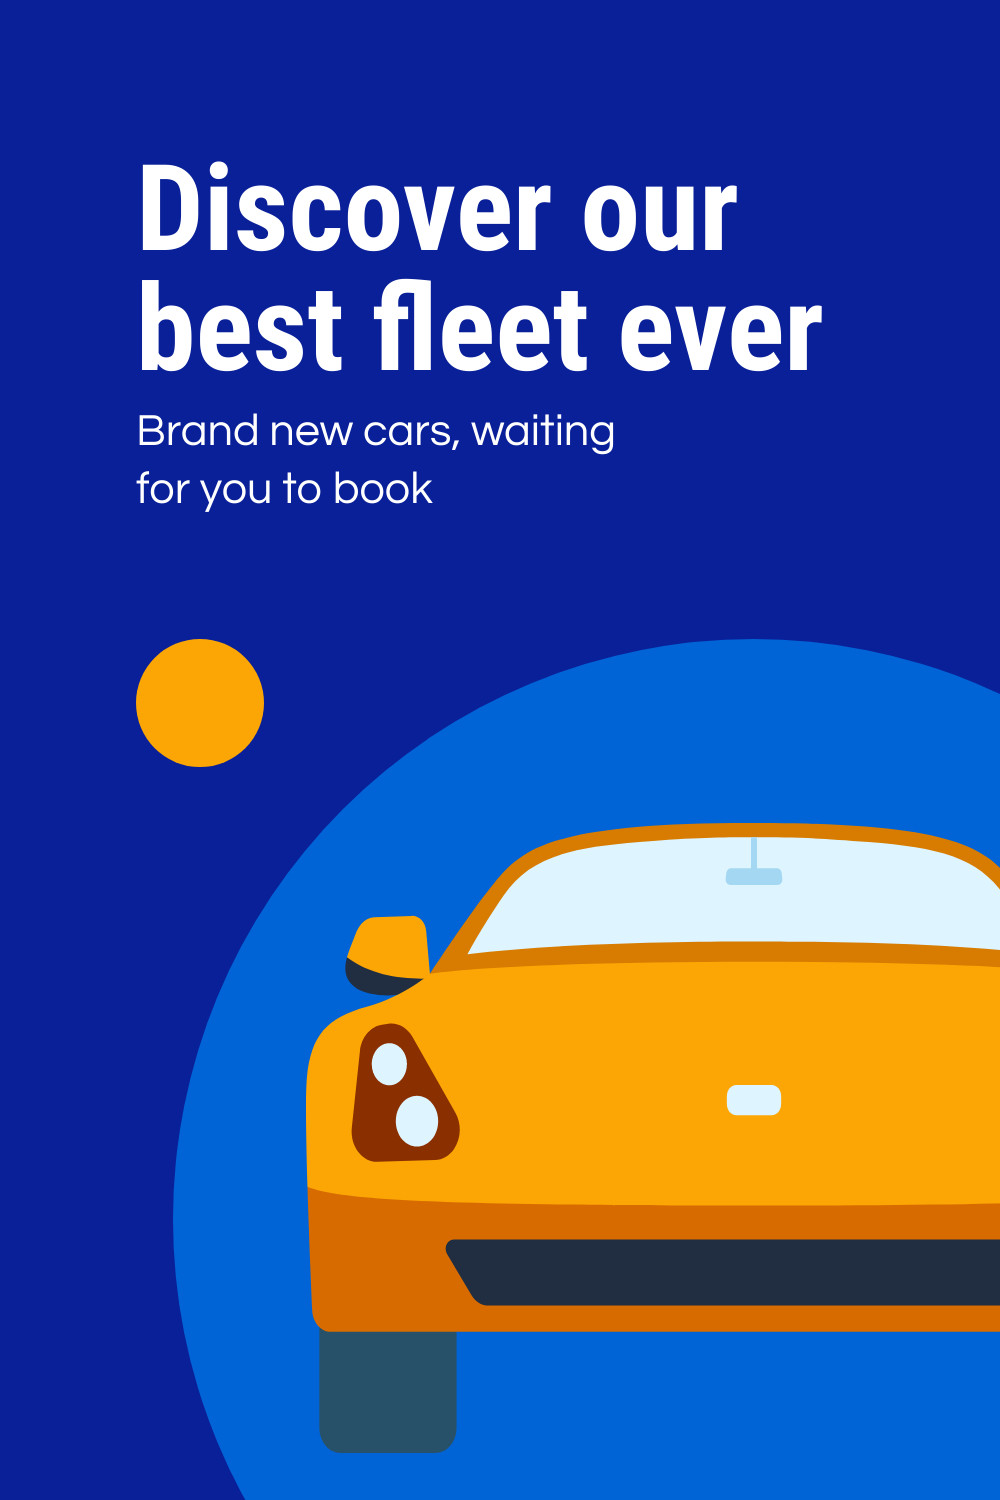 Brand New Car Fleet Waiting for You